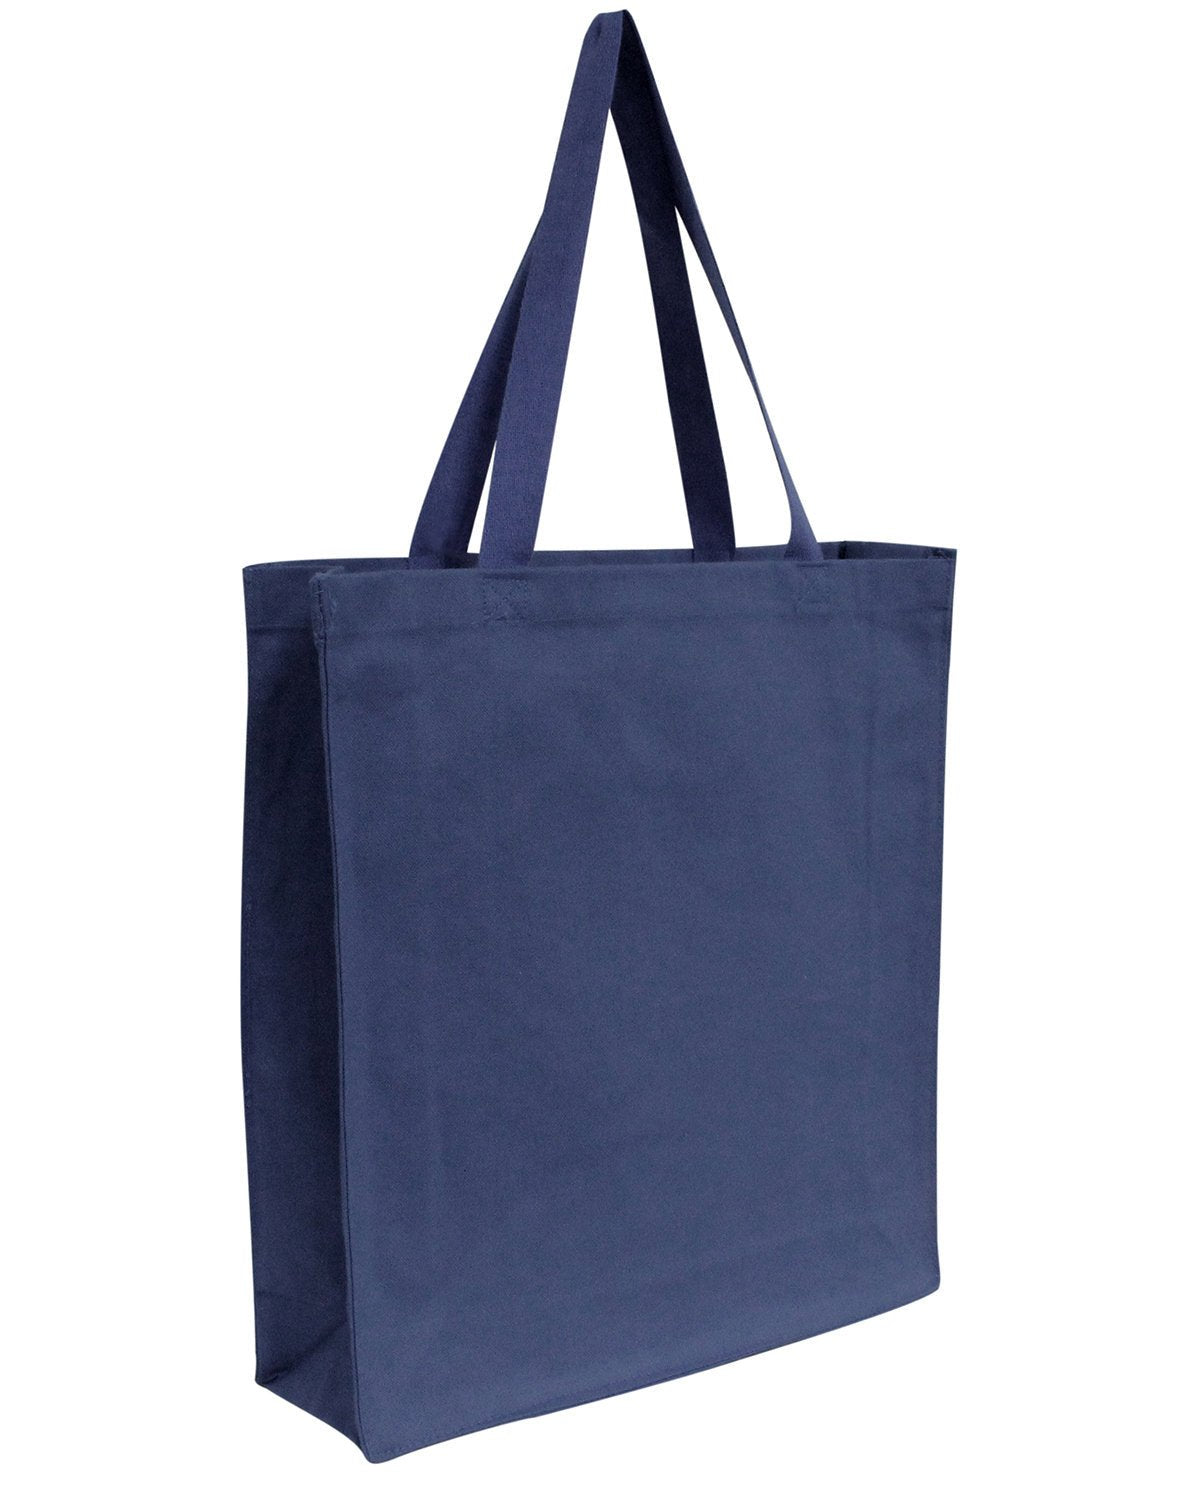 OAD100-OAD-NAVY-OAD-Bags and Accessories-1